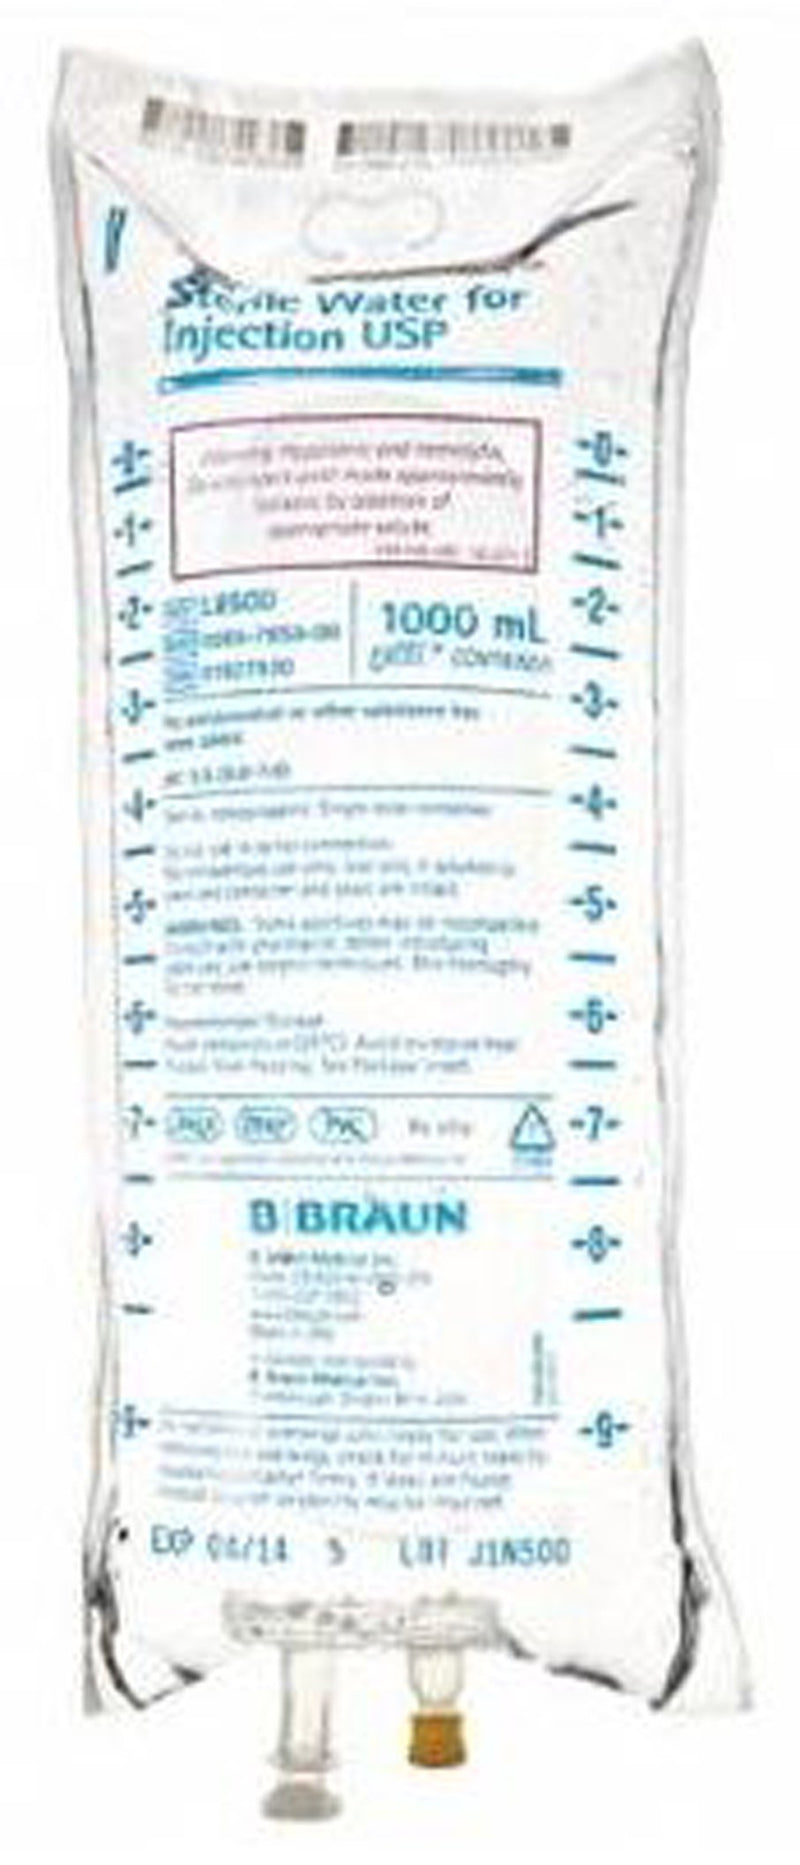 Diluent Sterile Water for Injection, Preservative Free IV Solution Flexible Bag 1,000 mL | B. Braun Medical | SurgiMac